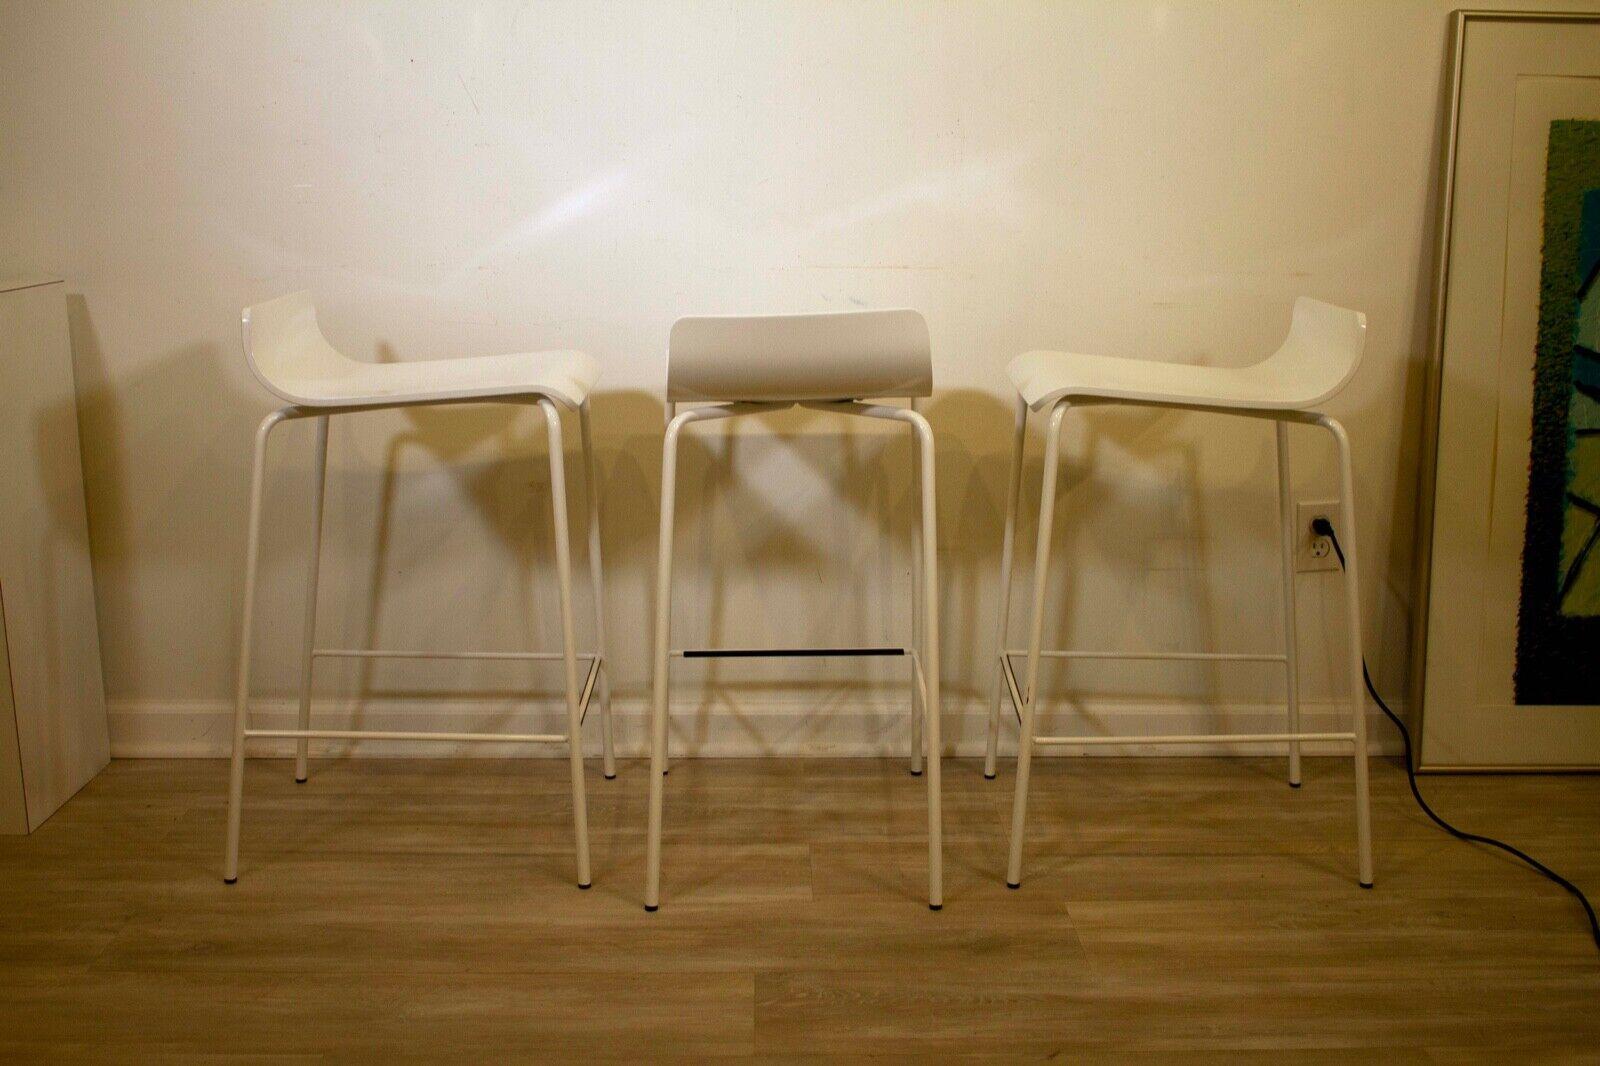 20th Century Set of 3x New White Contemporary Modern Bar Stools For Sale